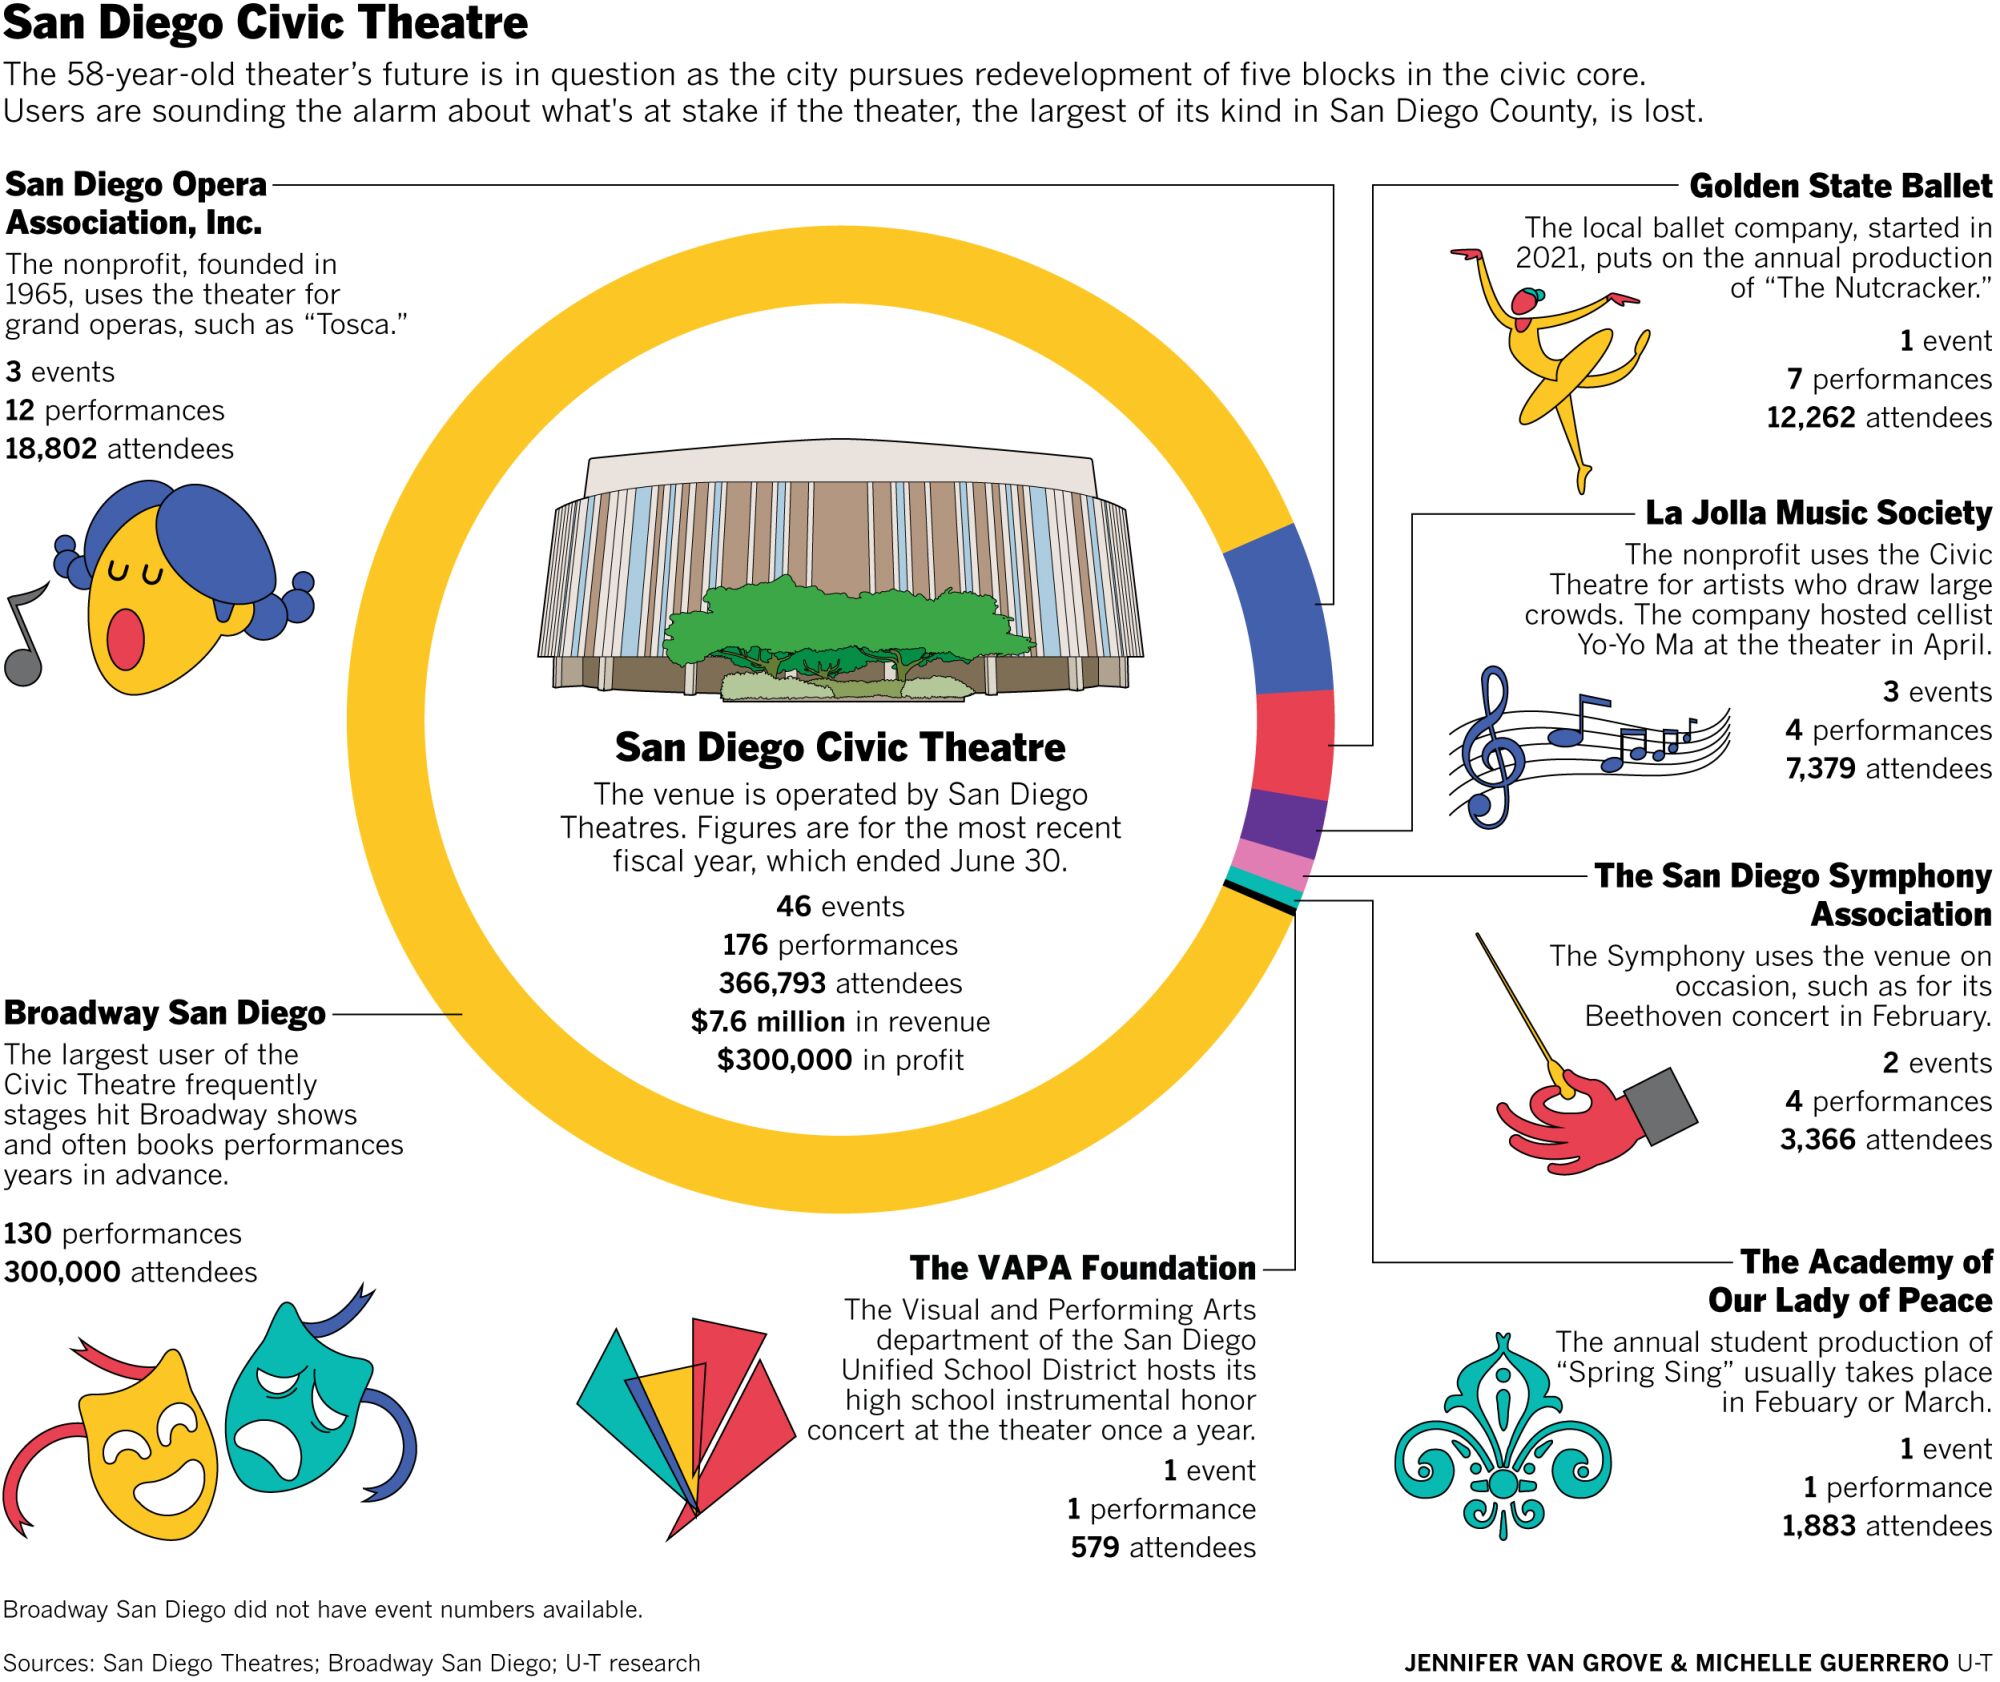 San Diego Civic Theater and its uses